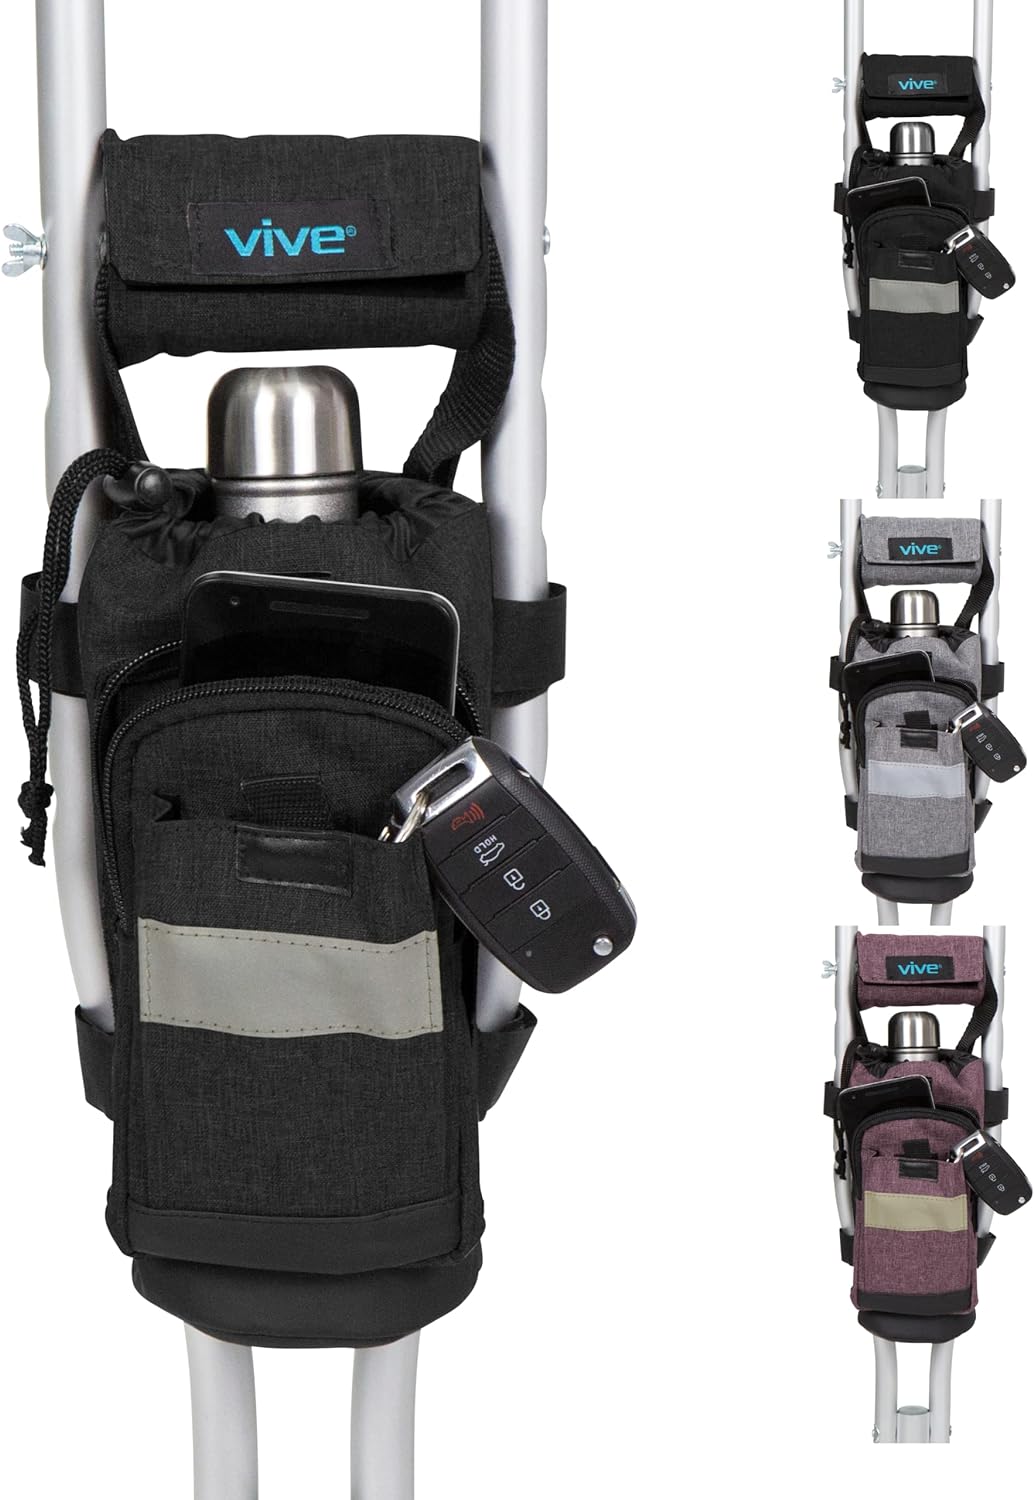 Vive Crutch Accessories Bag - Pouch for Crutches with Foam Padded Grip Covers